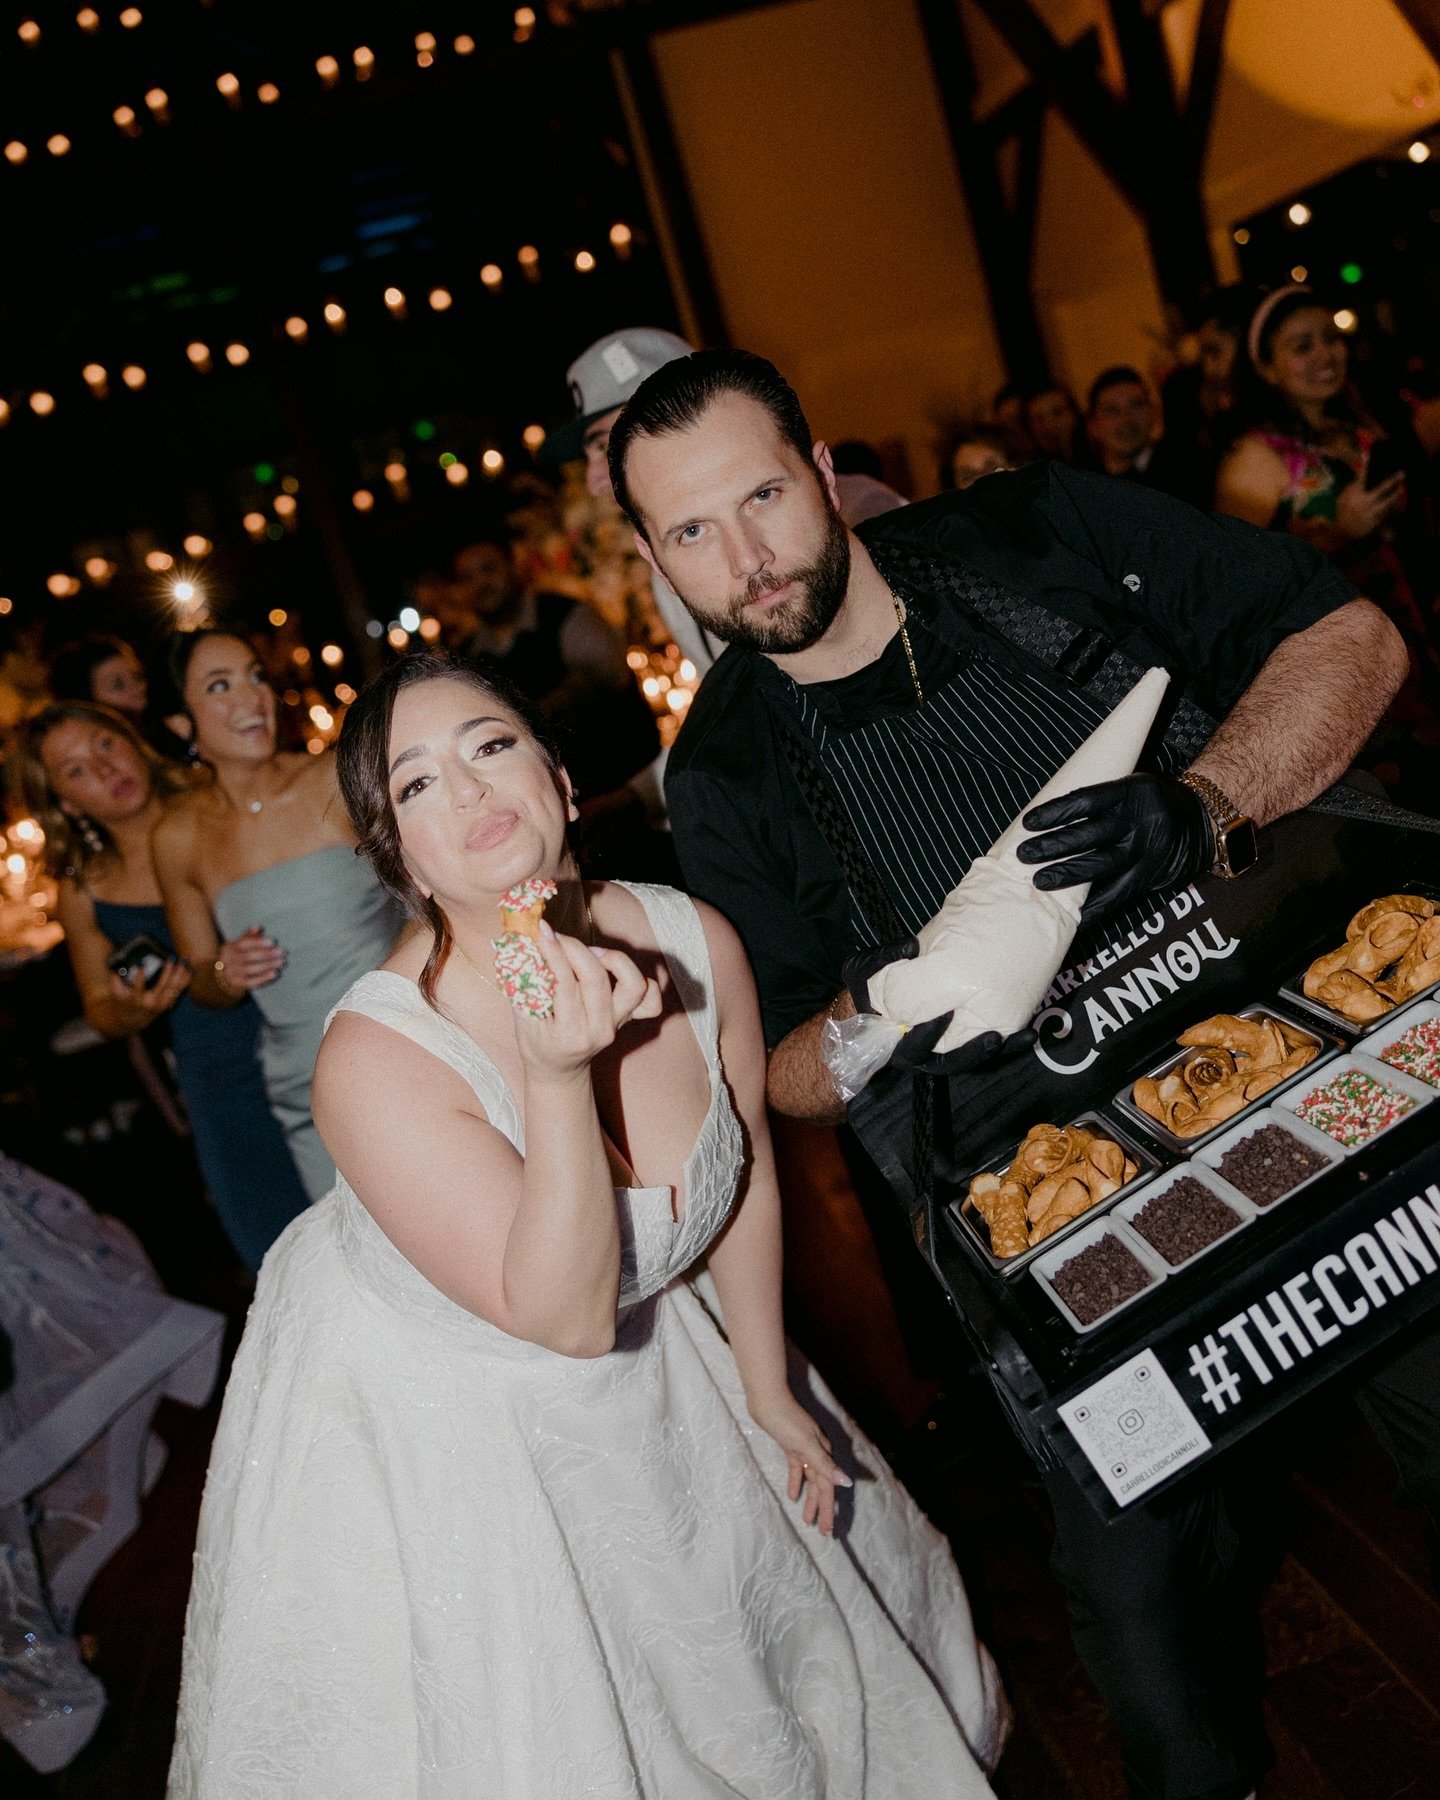 When you hire the #cannoliguy to serve hand piped cannoli at your wedding and people are STILL talking about it&hellip; 🤌🏻

Make a lasting impression with @carrellodicannoli ! 

📍 @crossedkeysestate 
📸 @erycpdtweddings 
👰🏻&zwj;♀️ @amandavinci 
